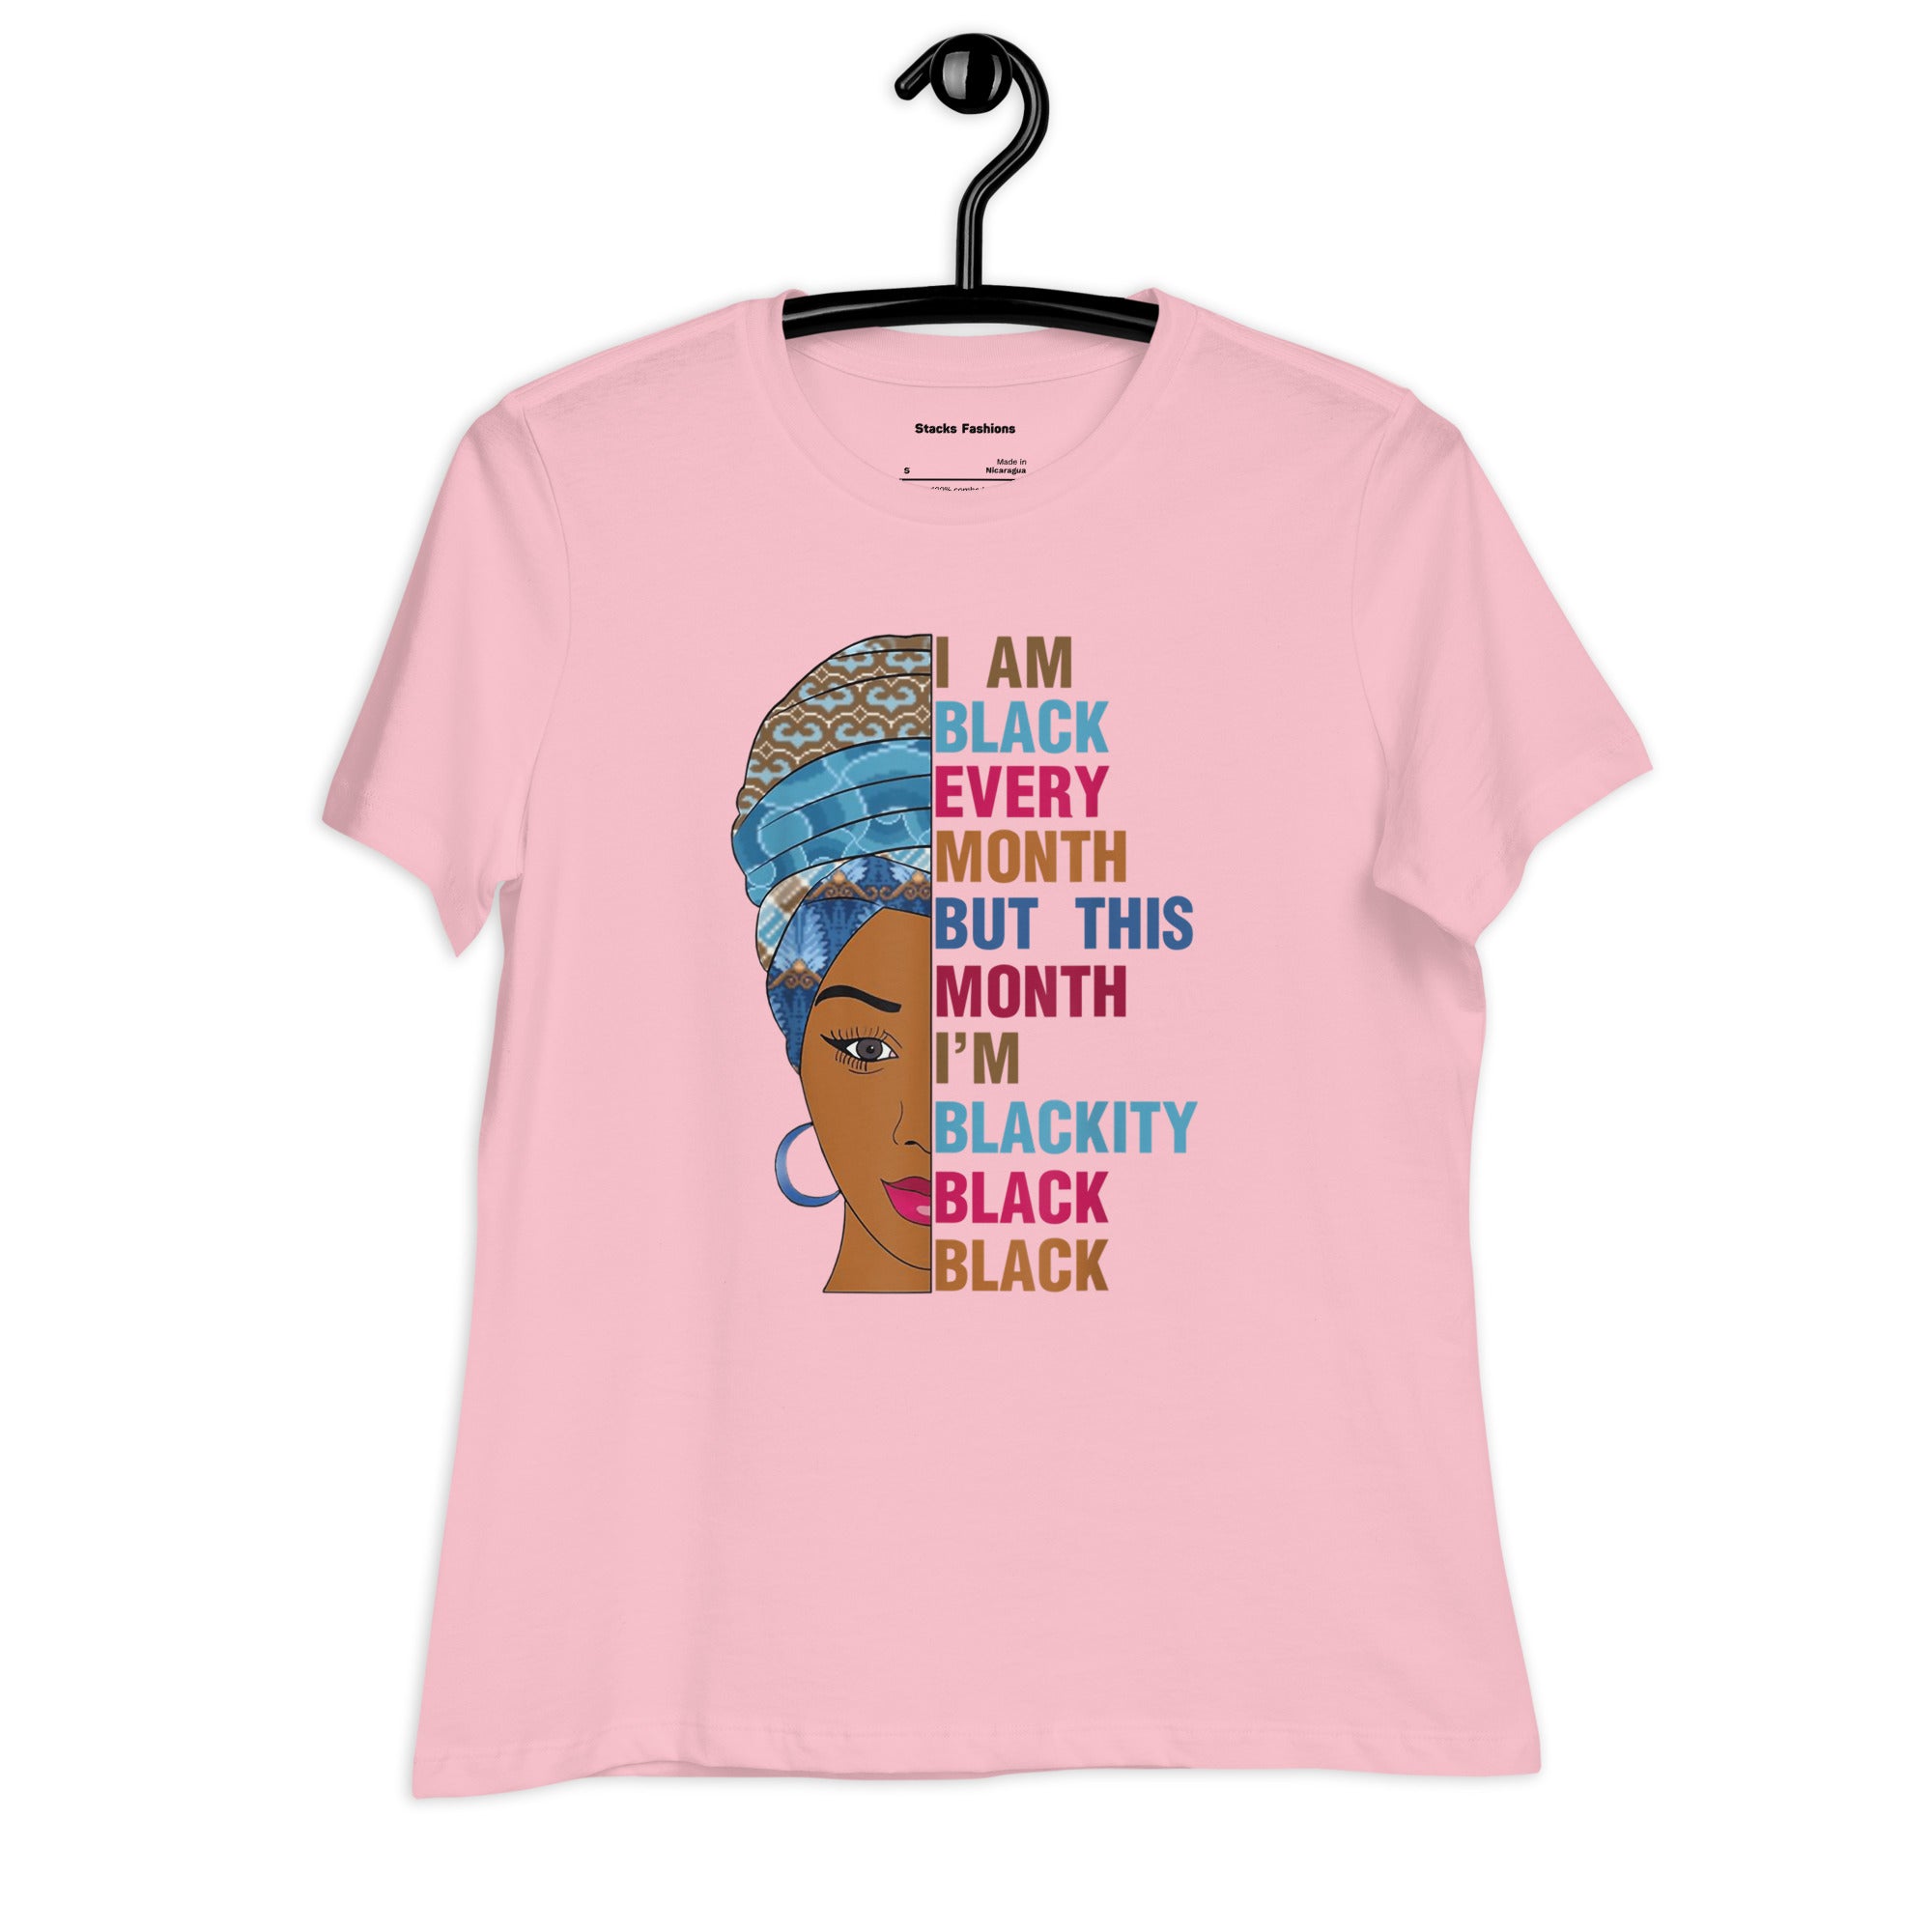 Black History Women's Relaxed T-Shirt